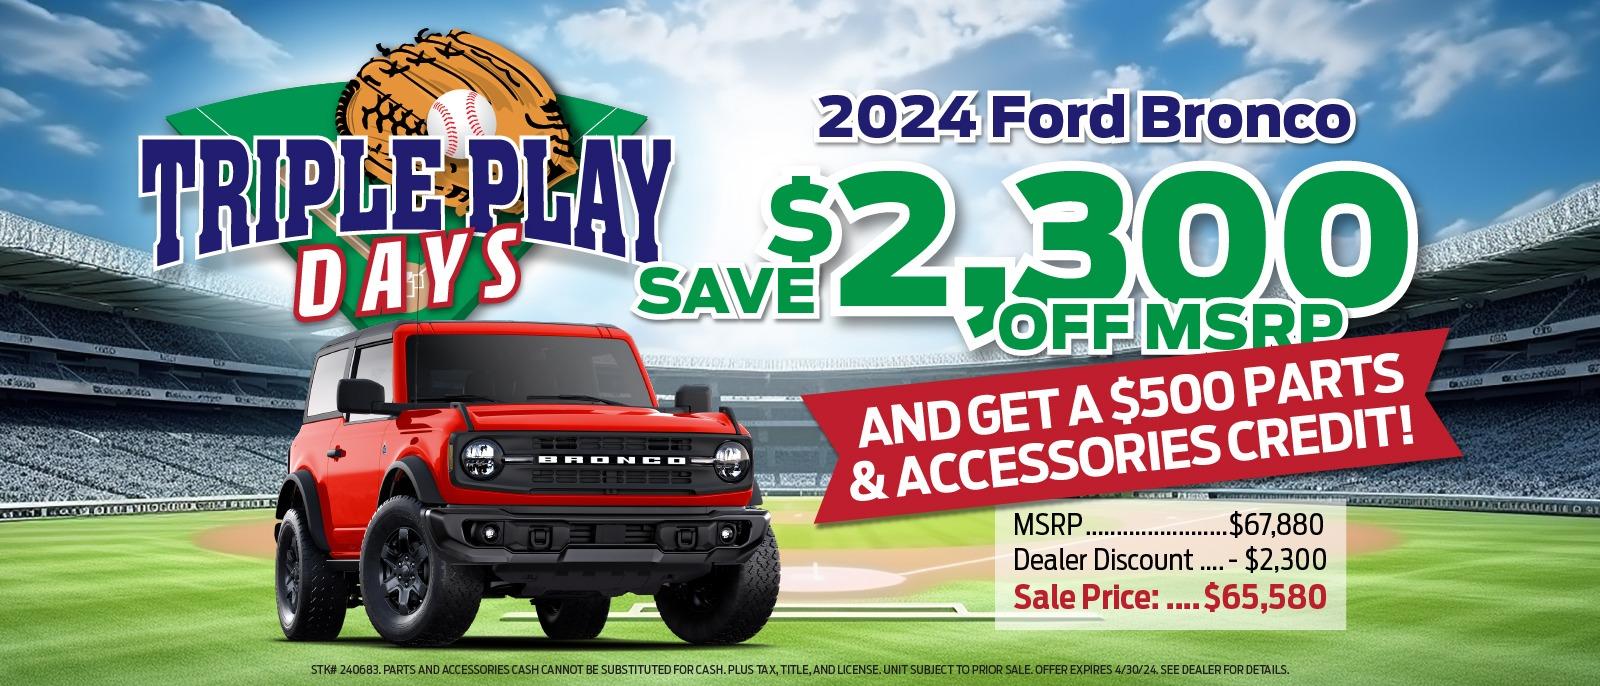 2024 Ford Bronco TRIPLE PLAY $2,300 DAYS SAVE BRONCO LOFF MSRP AND GET A $500 PARTS & ACCESSORIES CREDIT! MSRP. .$67,880 Dealer Discount....- $2,300 Sale Price : ....$65,580 STK# 240683. PARTS AND ACCESSORIES CASH CANNOT BE SUBSTITUTED FOR CASH. PLUS TAX, TITLE, AND LICENSE. UNIT SUBJECT TO PRIOR SALE. OFFER EXPIRES 4/30/24. SEE DEALER FOR DETAILS.